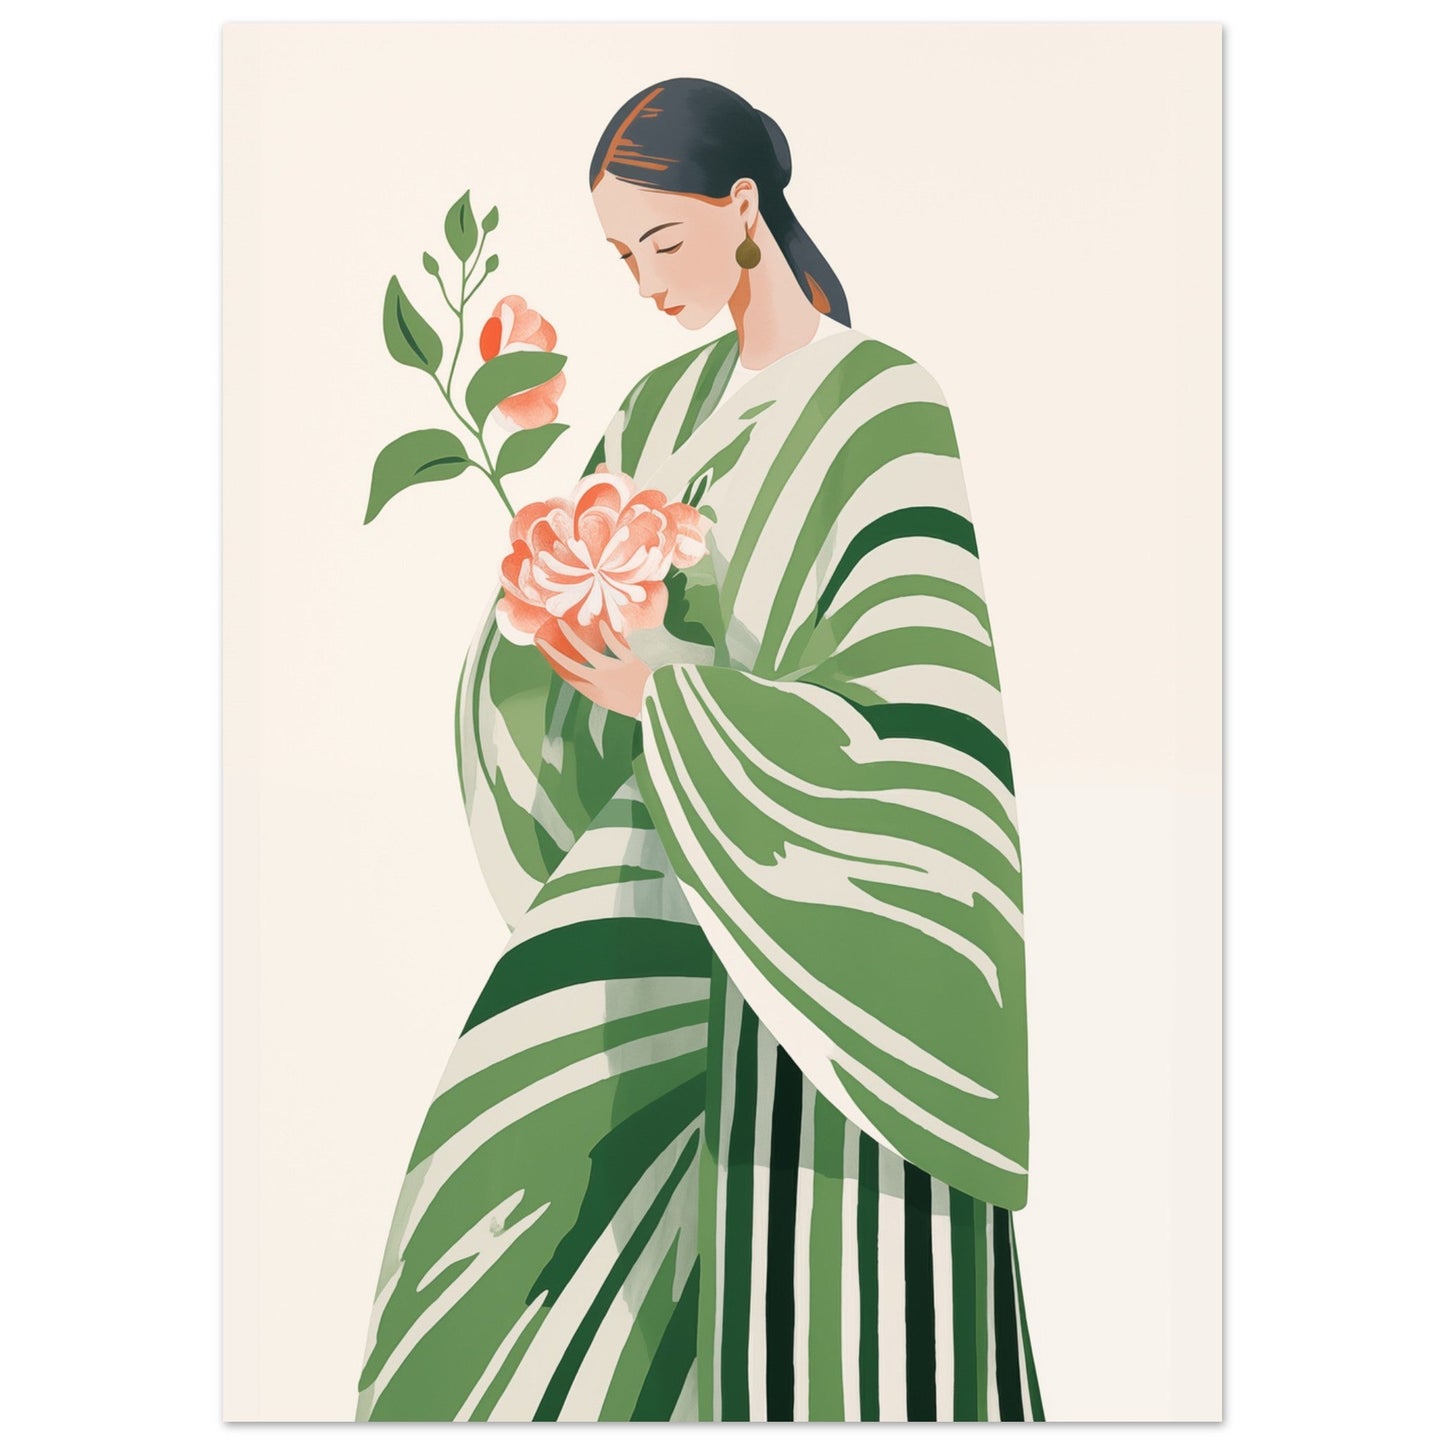 A stunning Blossom Embrace poster of a woman in a Pop Art green kimono gracefully holding flowers as an exquisite piece of wall art.